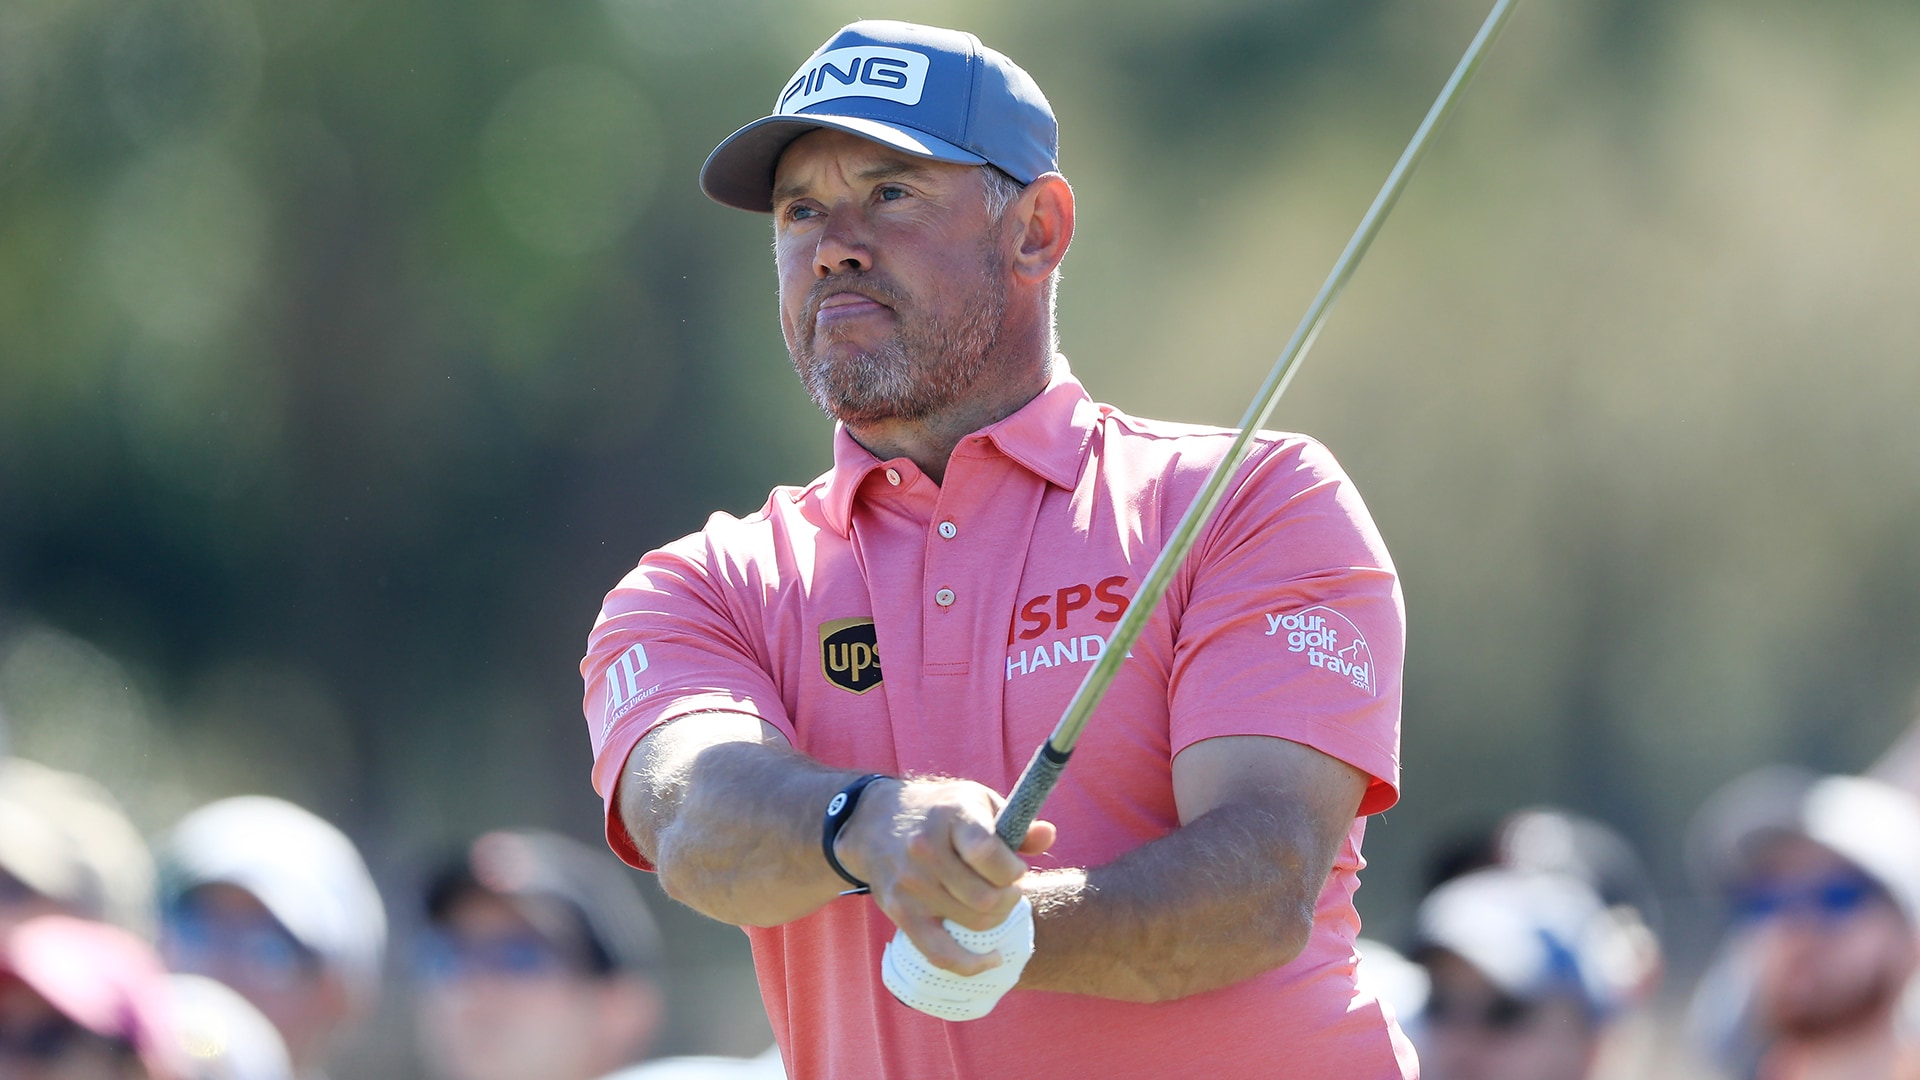 Lee Westwood: ‘Not worth it’ to play early PGA Tour events with travel restrictions